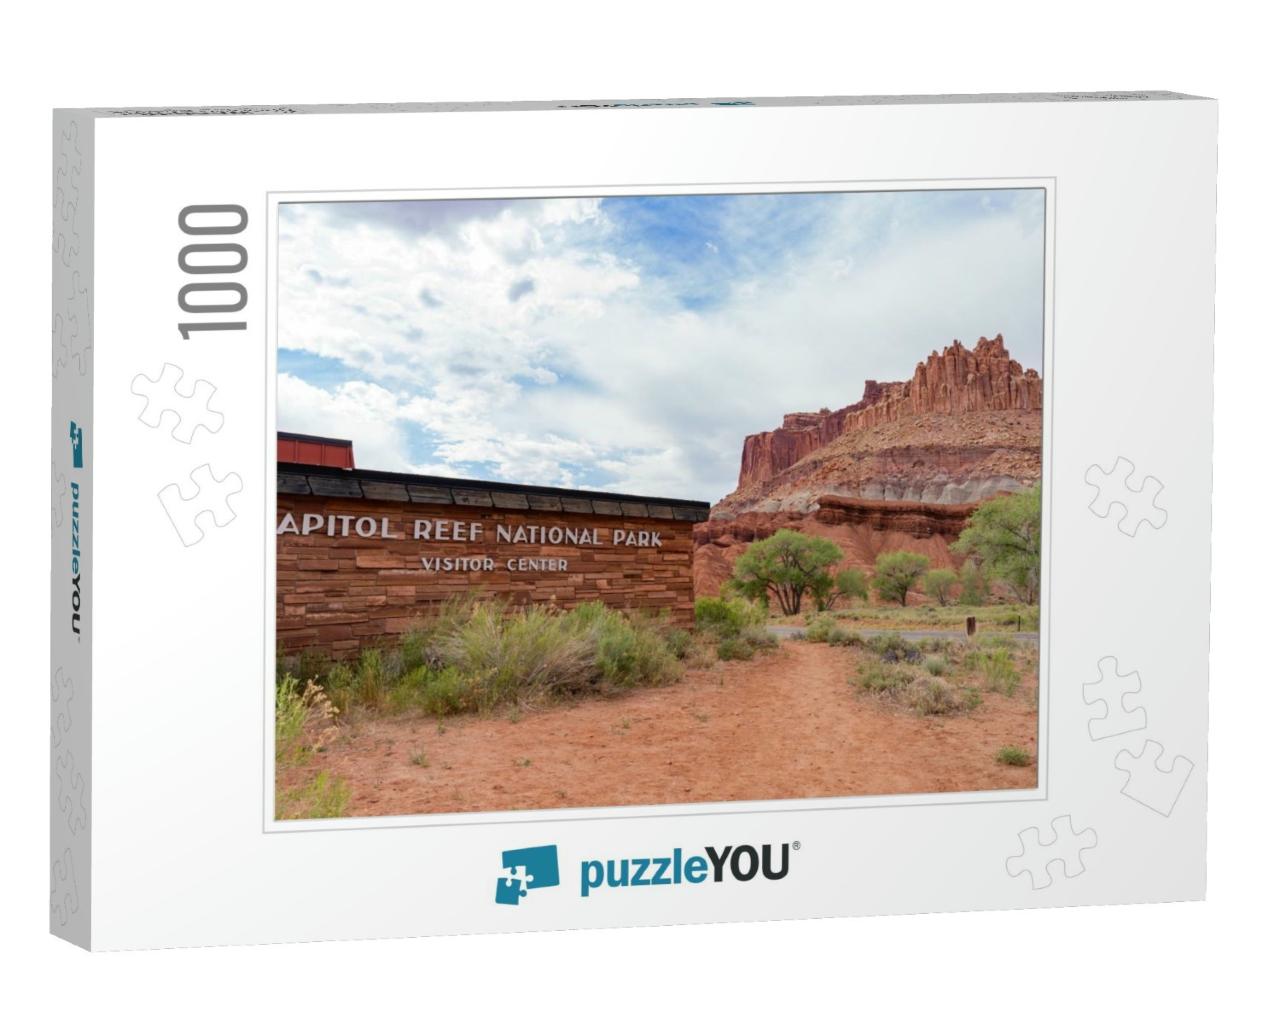 Sign of the Capitol Reef National Park Visitor Center At... Jigsaw Puzzle with 1000 pieces